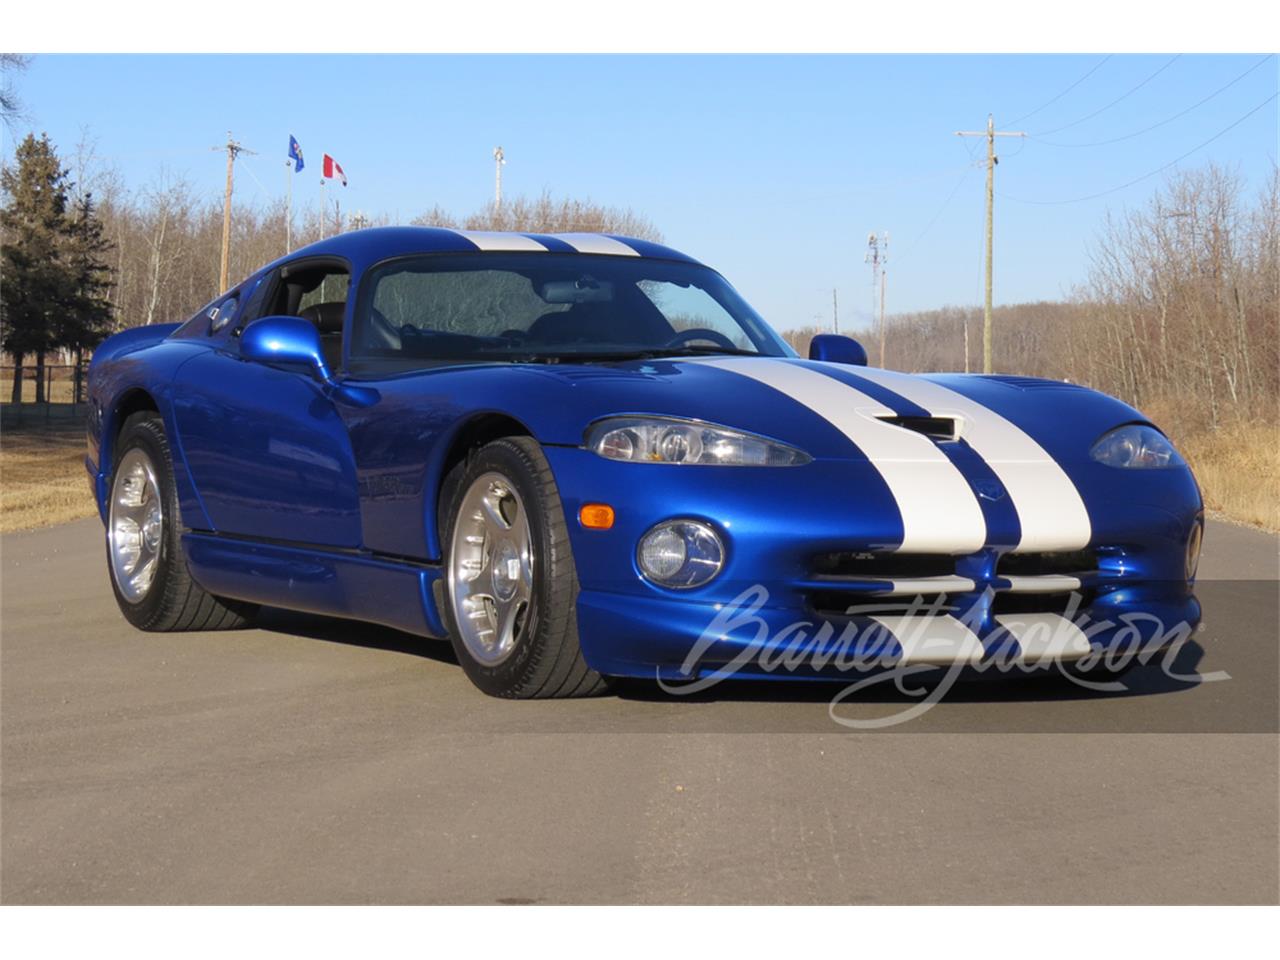 For Sale at Auction: 1996 Dodge Viper in Scottsdale, Arizona for sale in Scottsdale, AZ